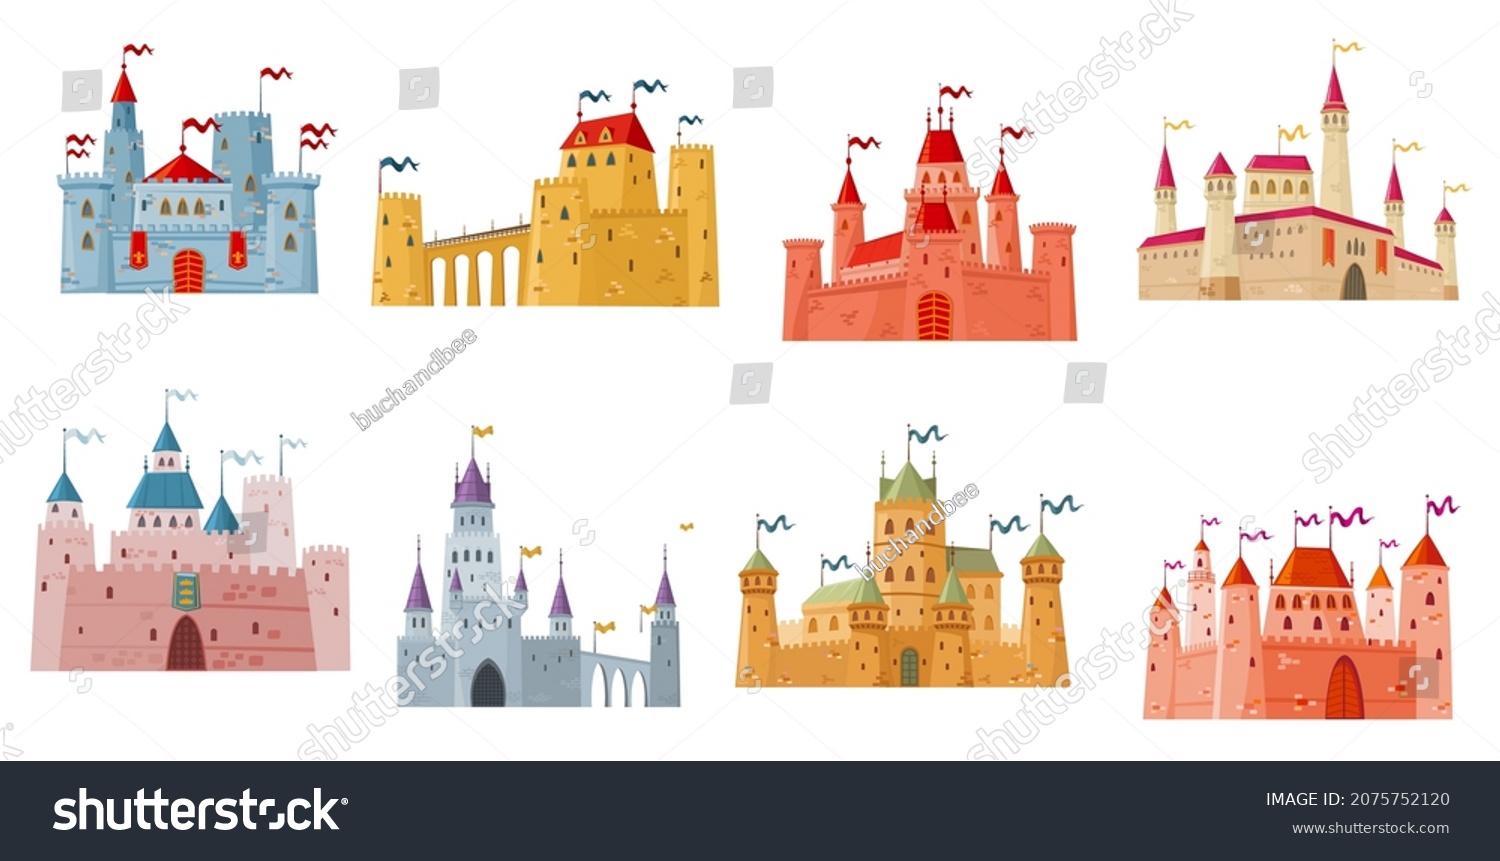 SVG of Medieval castle, palace and fortress with towers cartoon buildings. Isolated vector fairytale kingdom castles, palace, mansion, citadel or fort with flags, gates and turrets, bridges, defensive walls svg